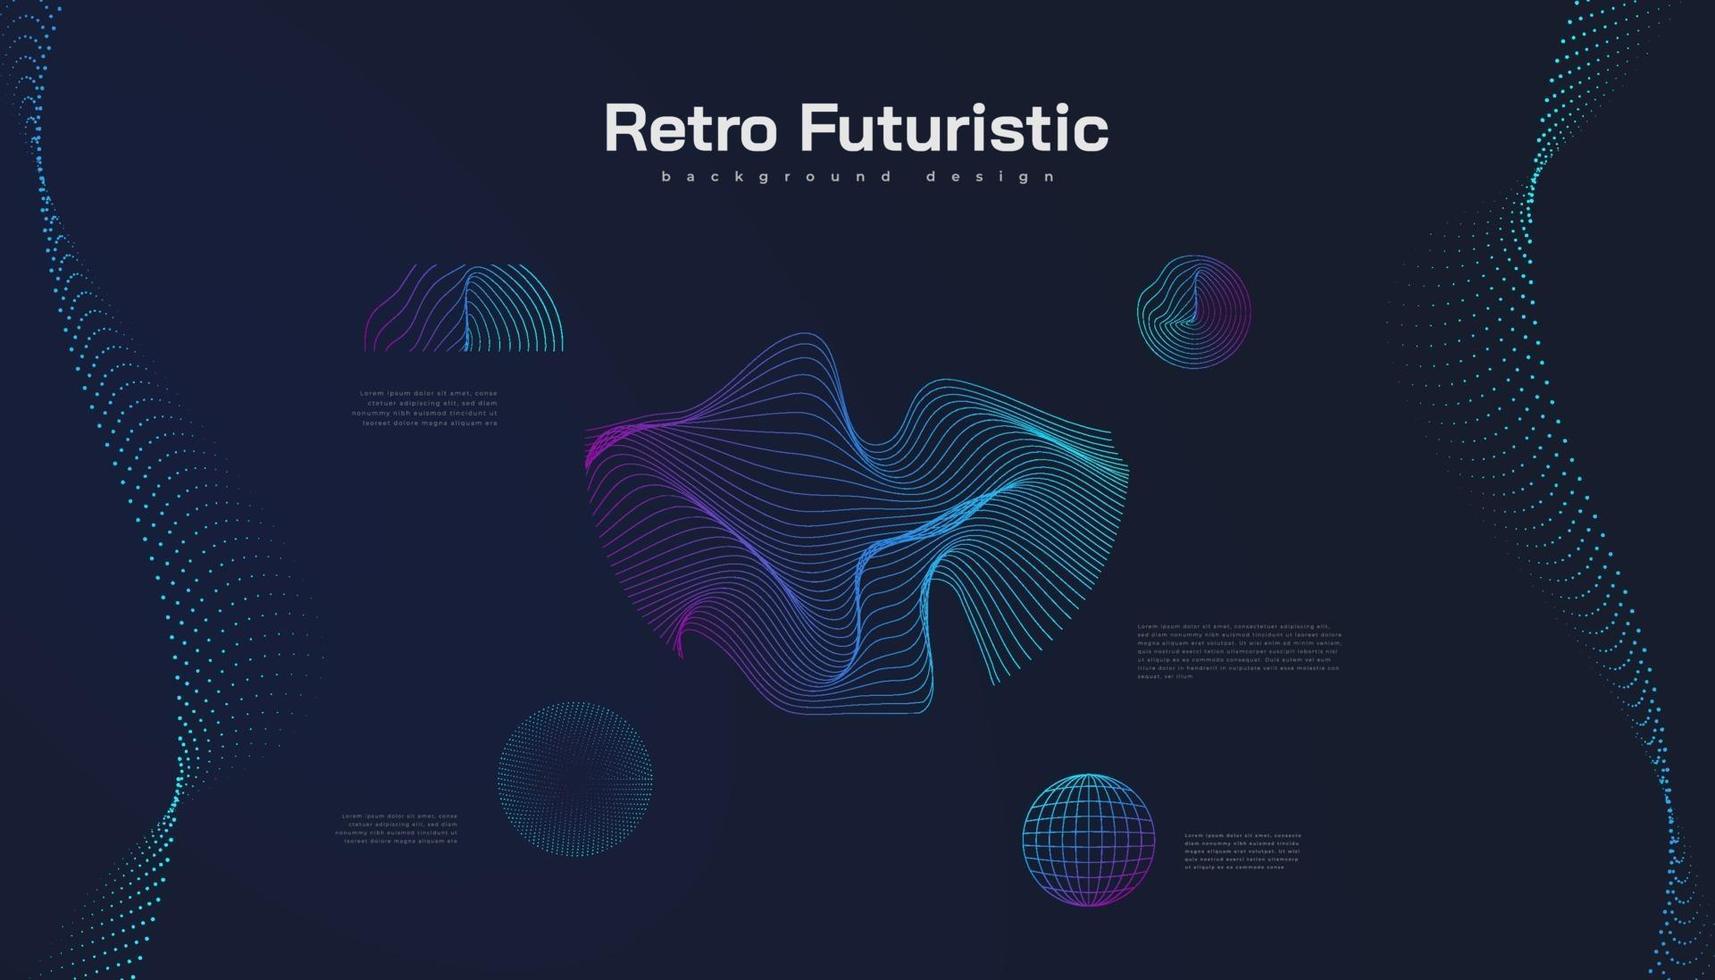 Retro Futuristic Background with Abstract Colorful Wavy Shapes vector